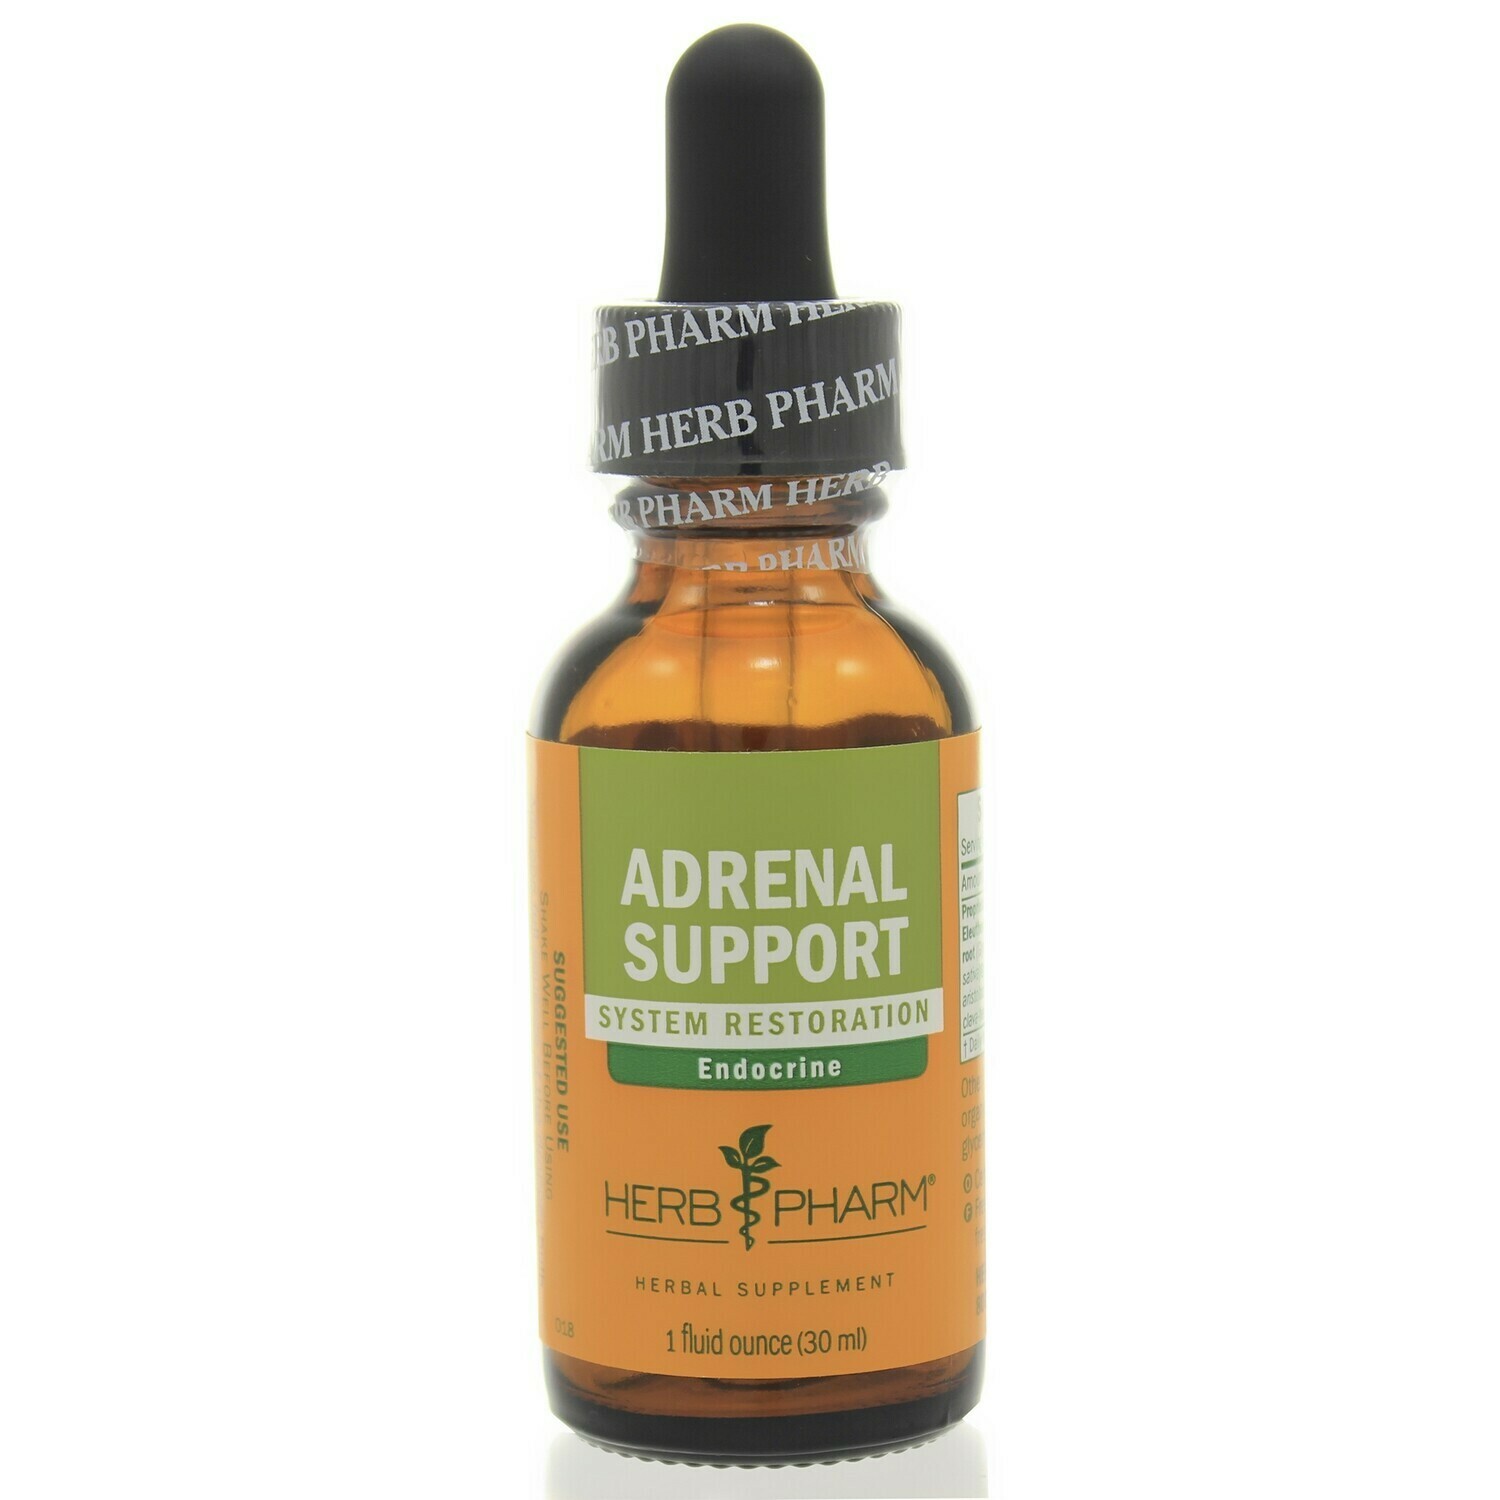 Adrenal Support by Herb Pharm